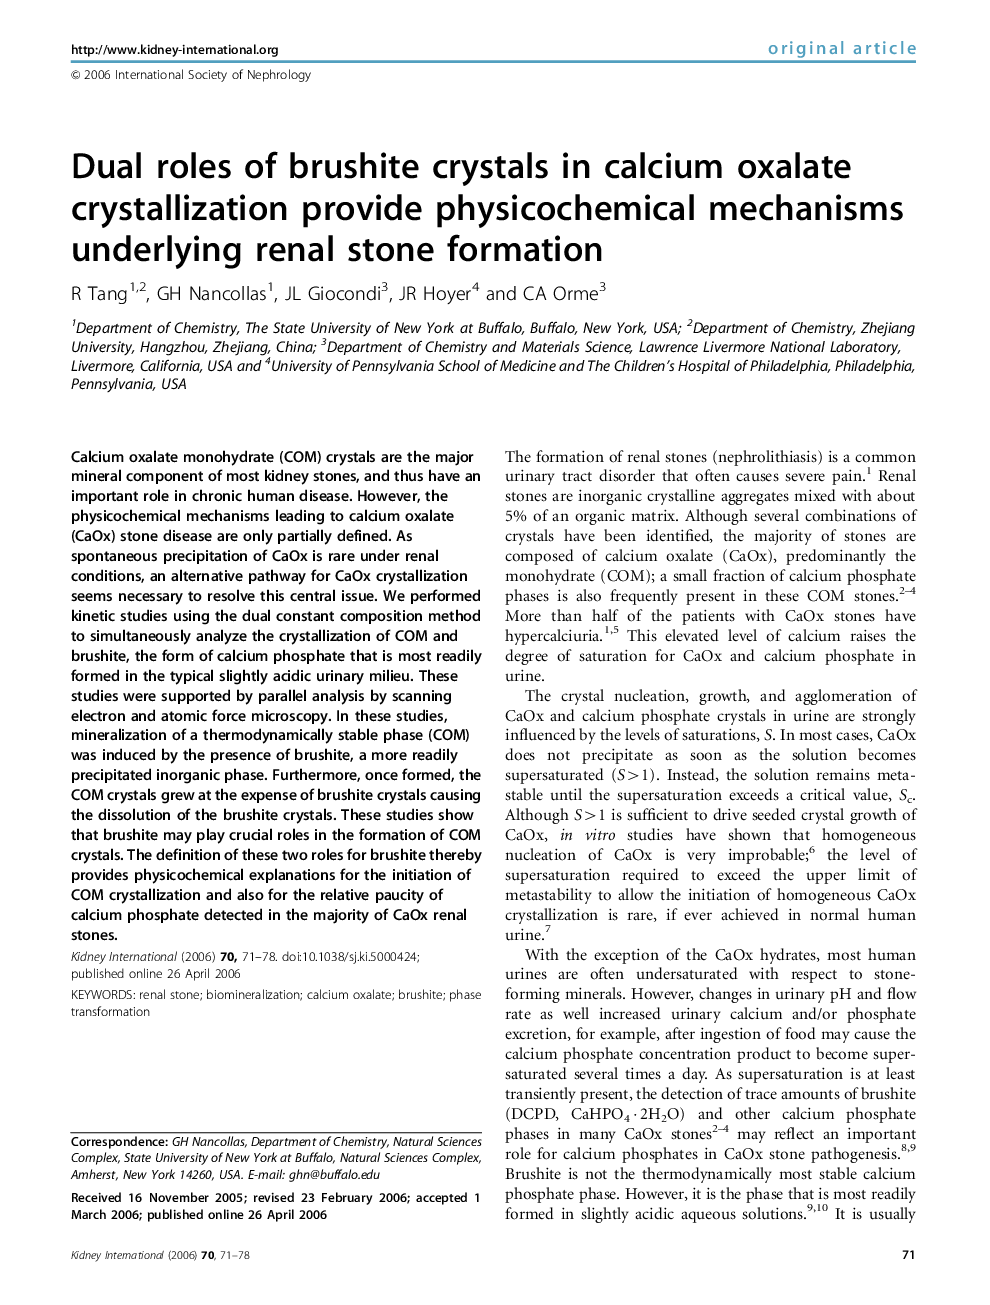 Dual roles of brushite crystals in calcium oxalate crystallization provide physicochemical mechanisms underlying renal stone formation